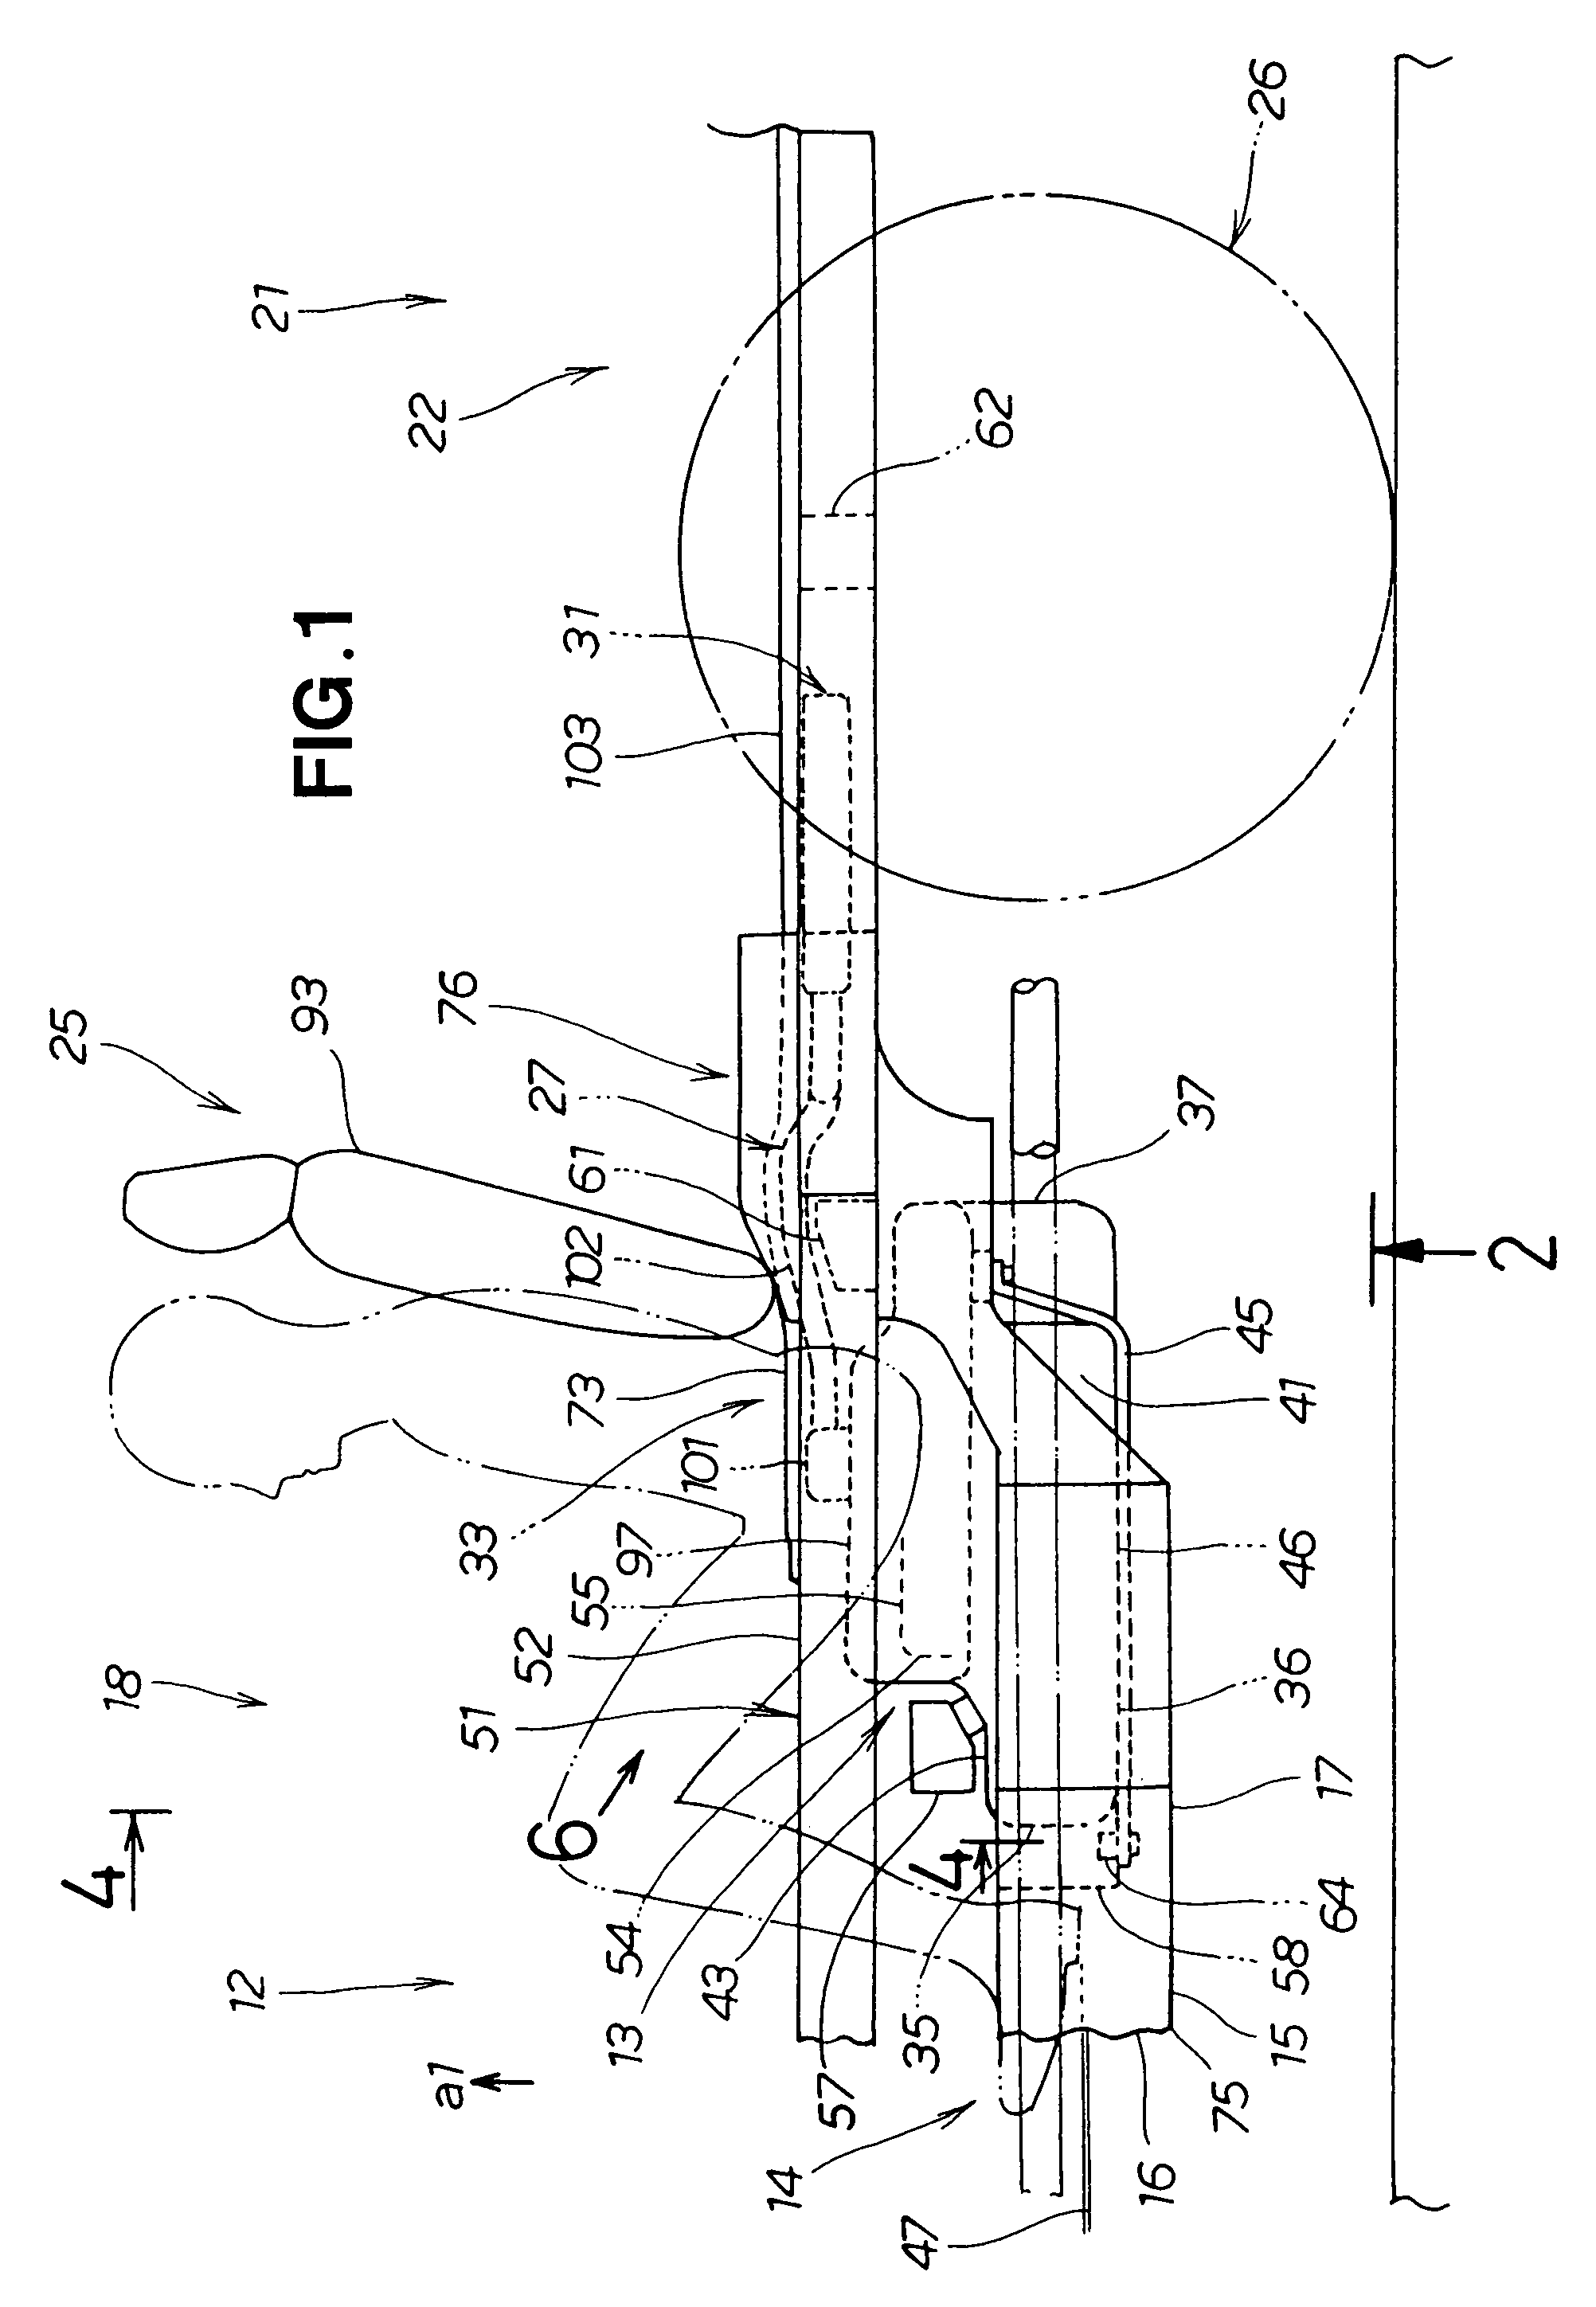 Vehicle body structure having fuel tank and canister